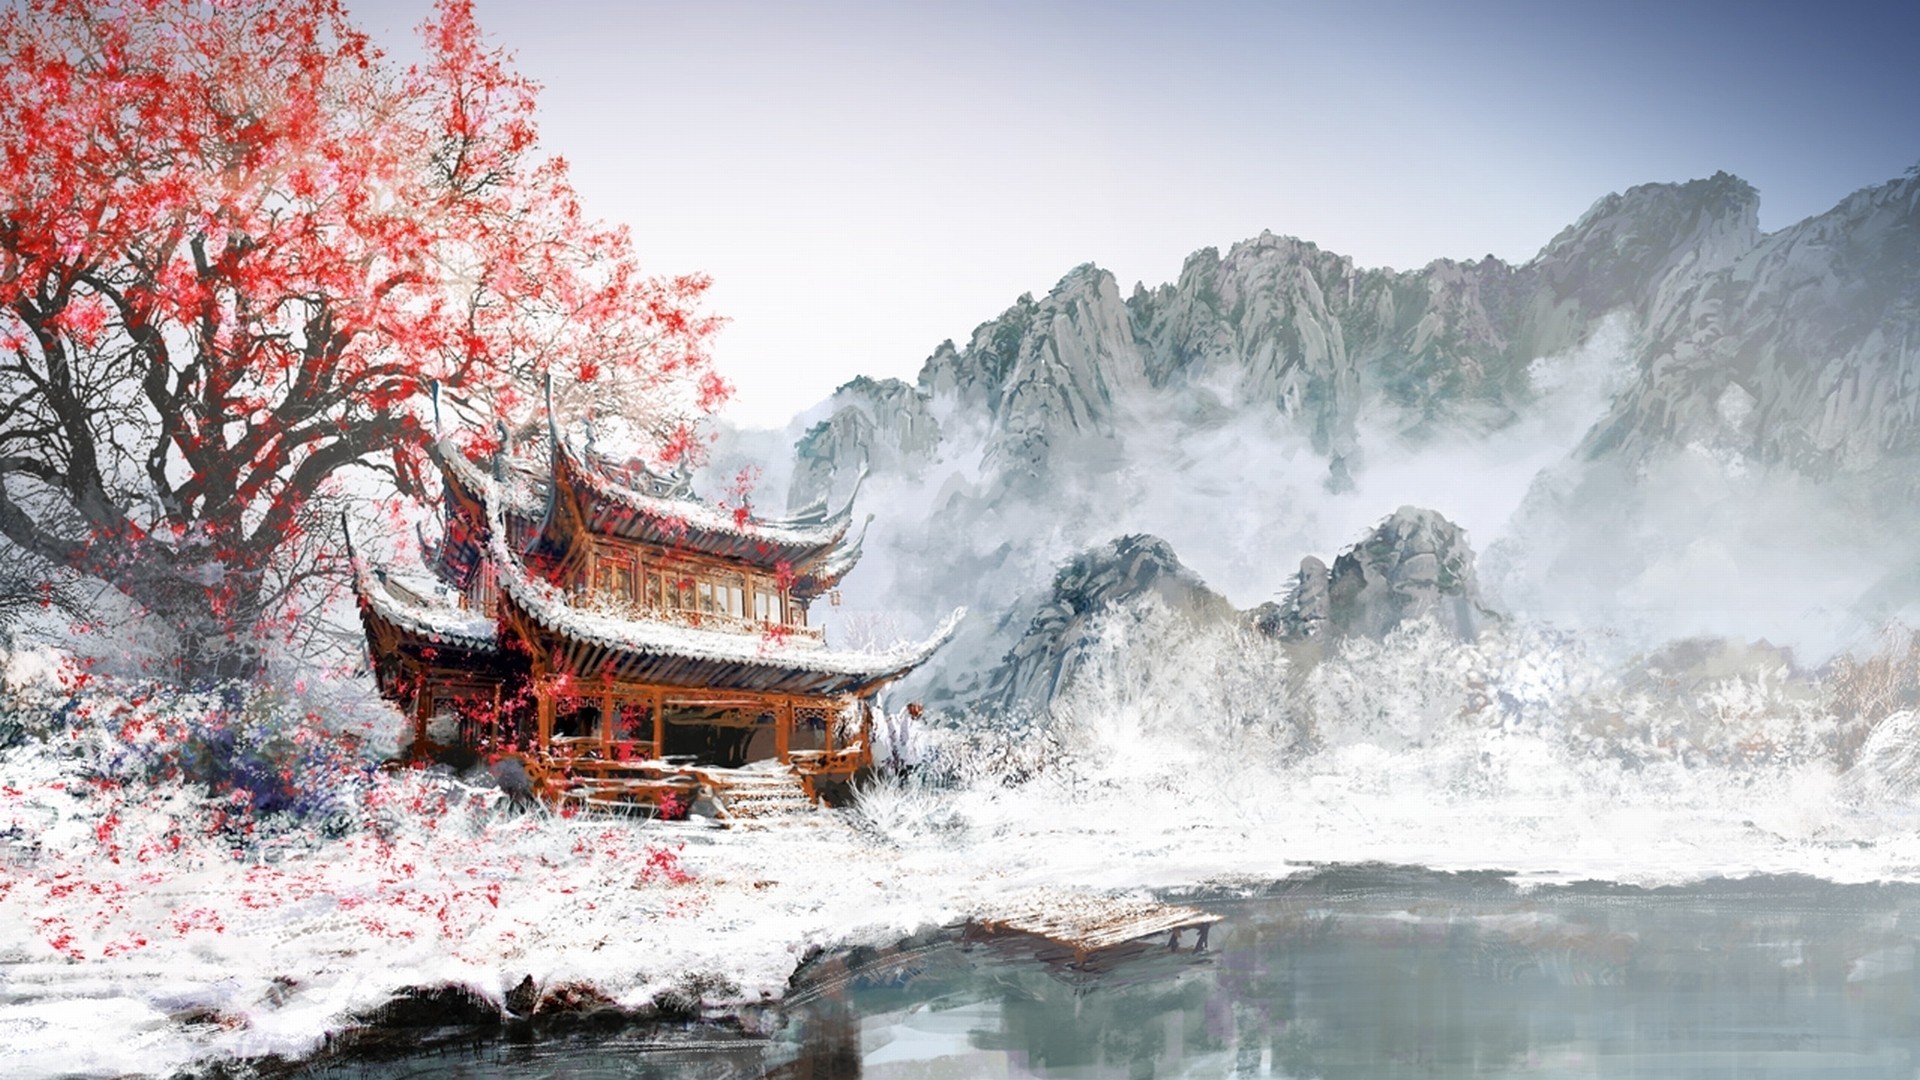 painting, Japan, Winter, White, Snow, Mountain, Cherry Blossom Wallpaper